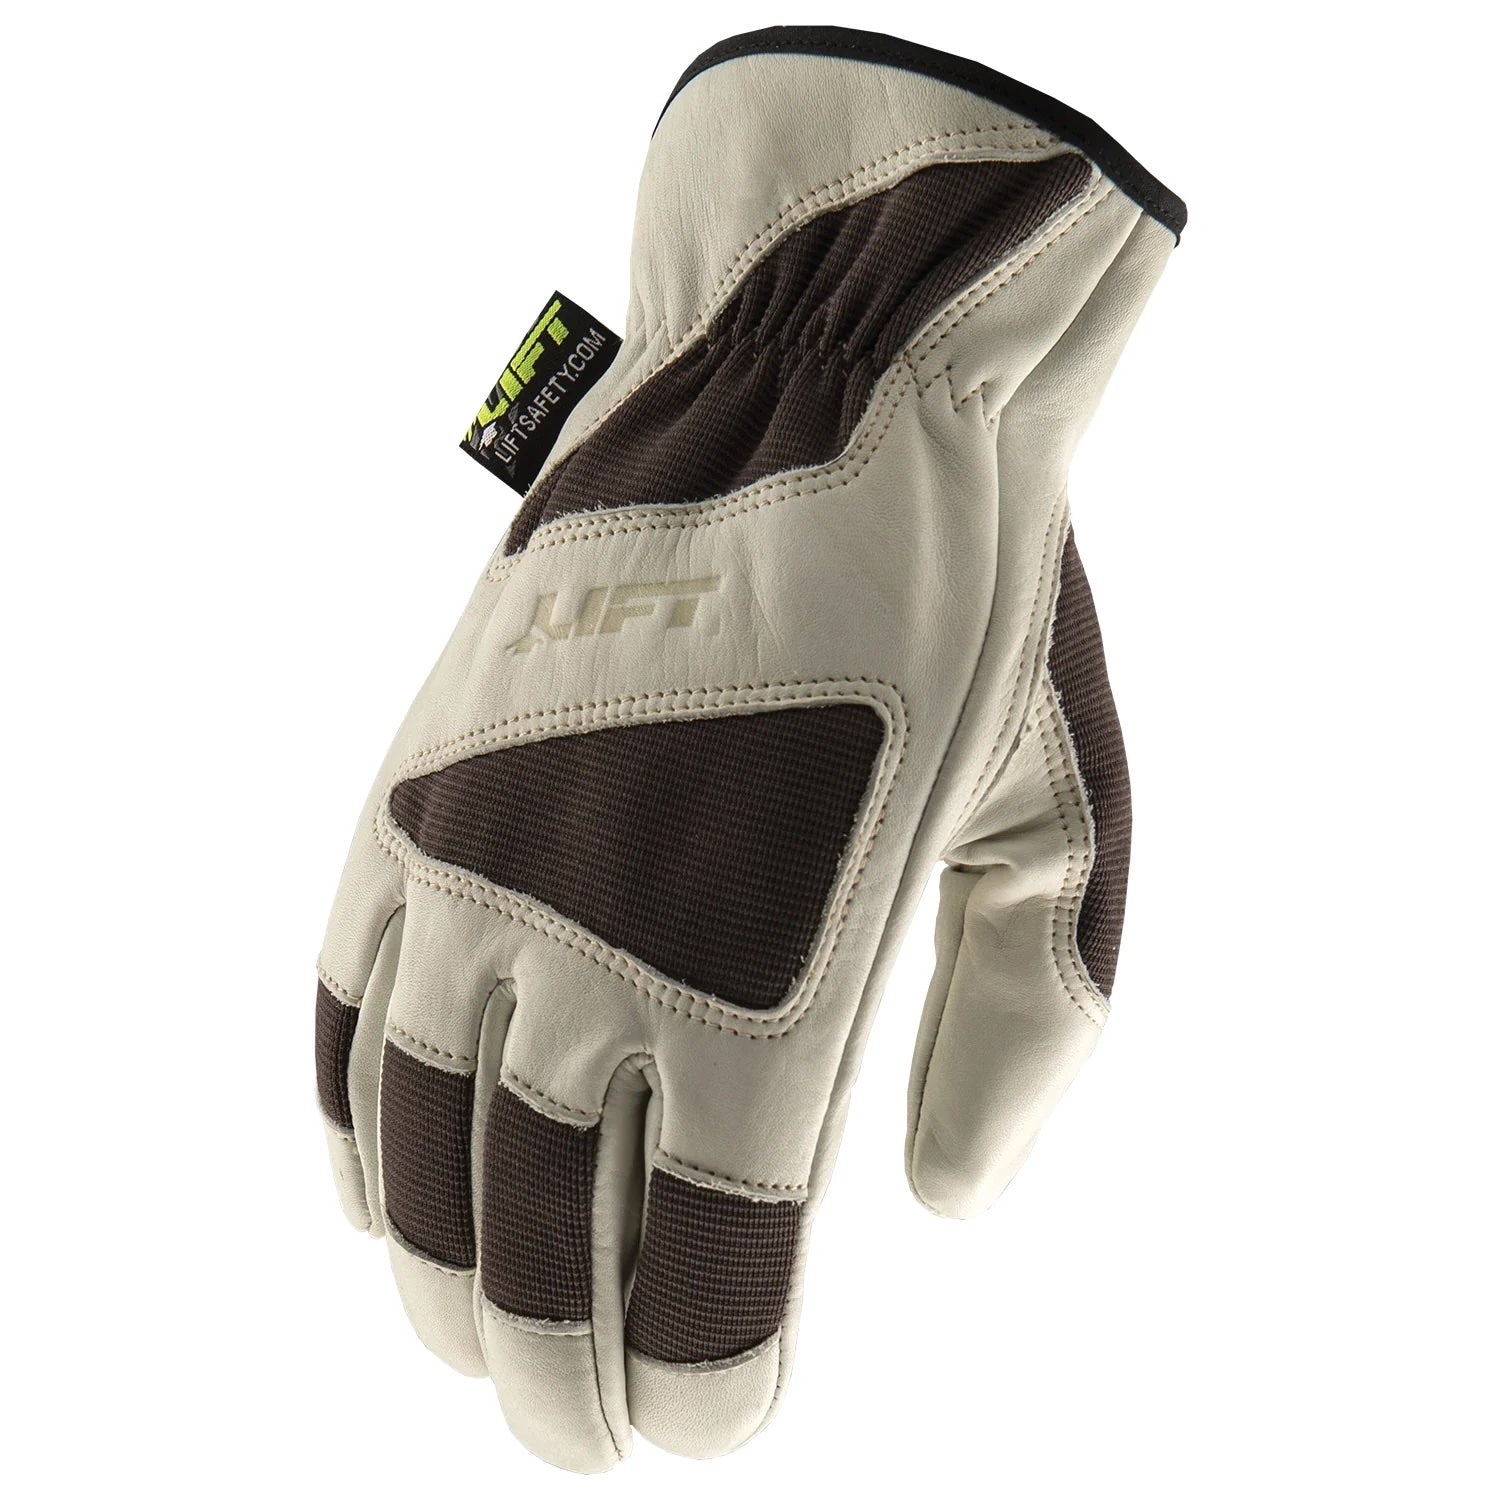 Lift Safety 8 Seconds Multi-Purpose Leather/Mesh Glove